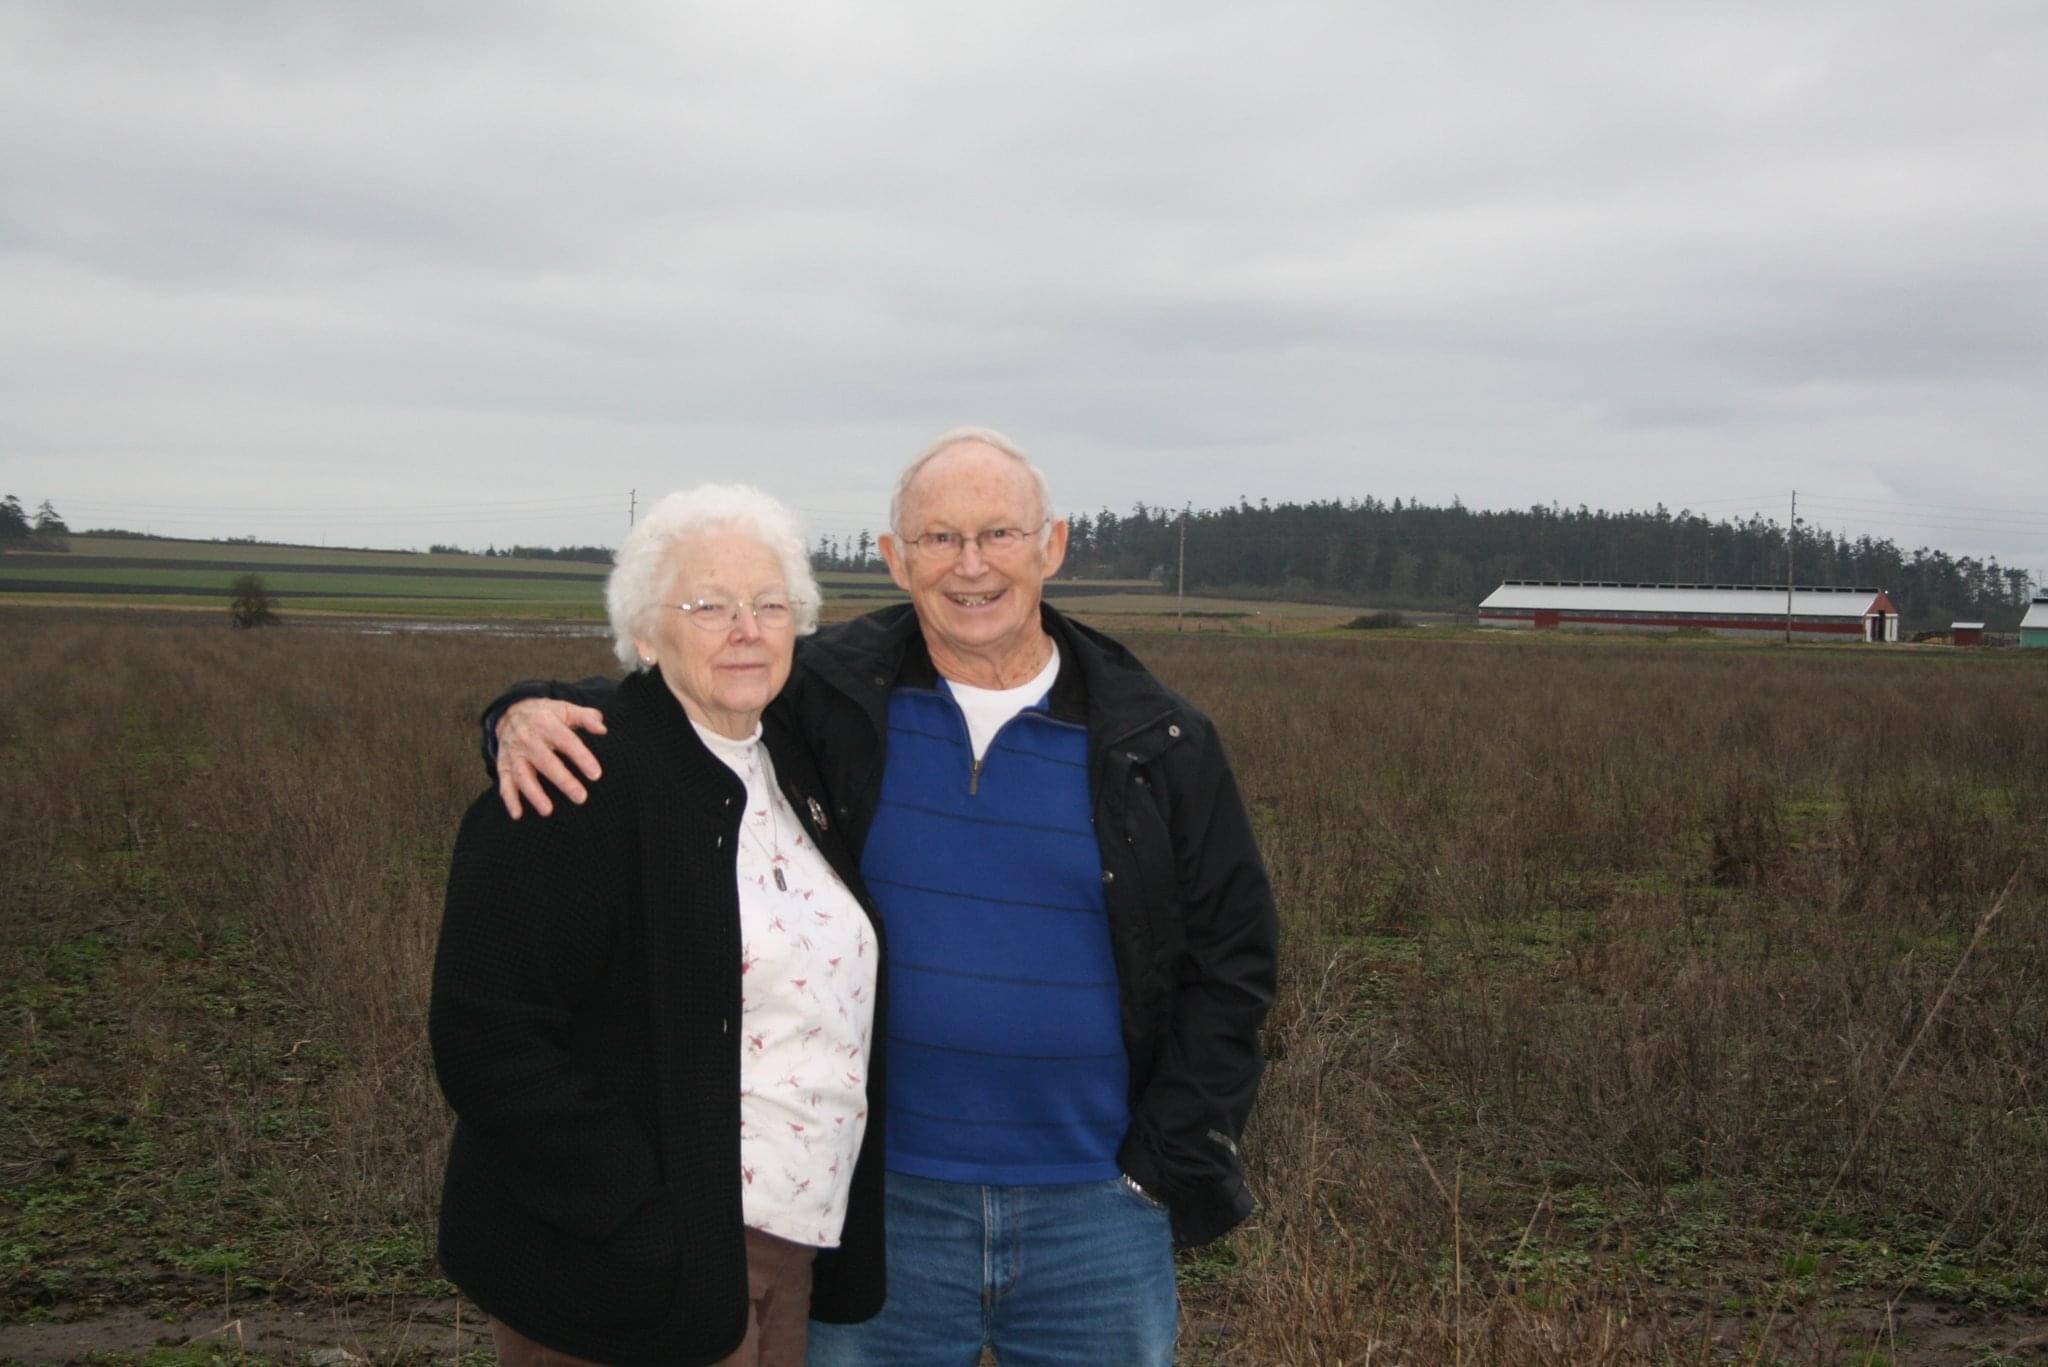 Dave Engle, pictured here with his wife, Dolores, is part of the fifth generation of Engles to own the farm known as the Engle Family Homestead.